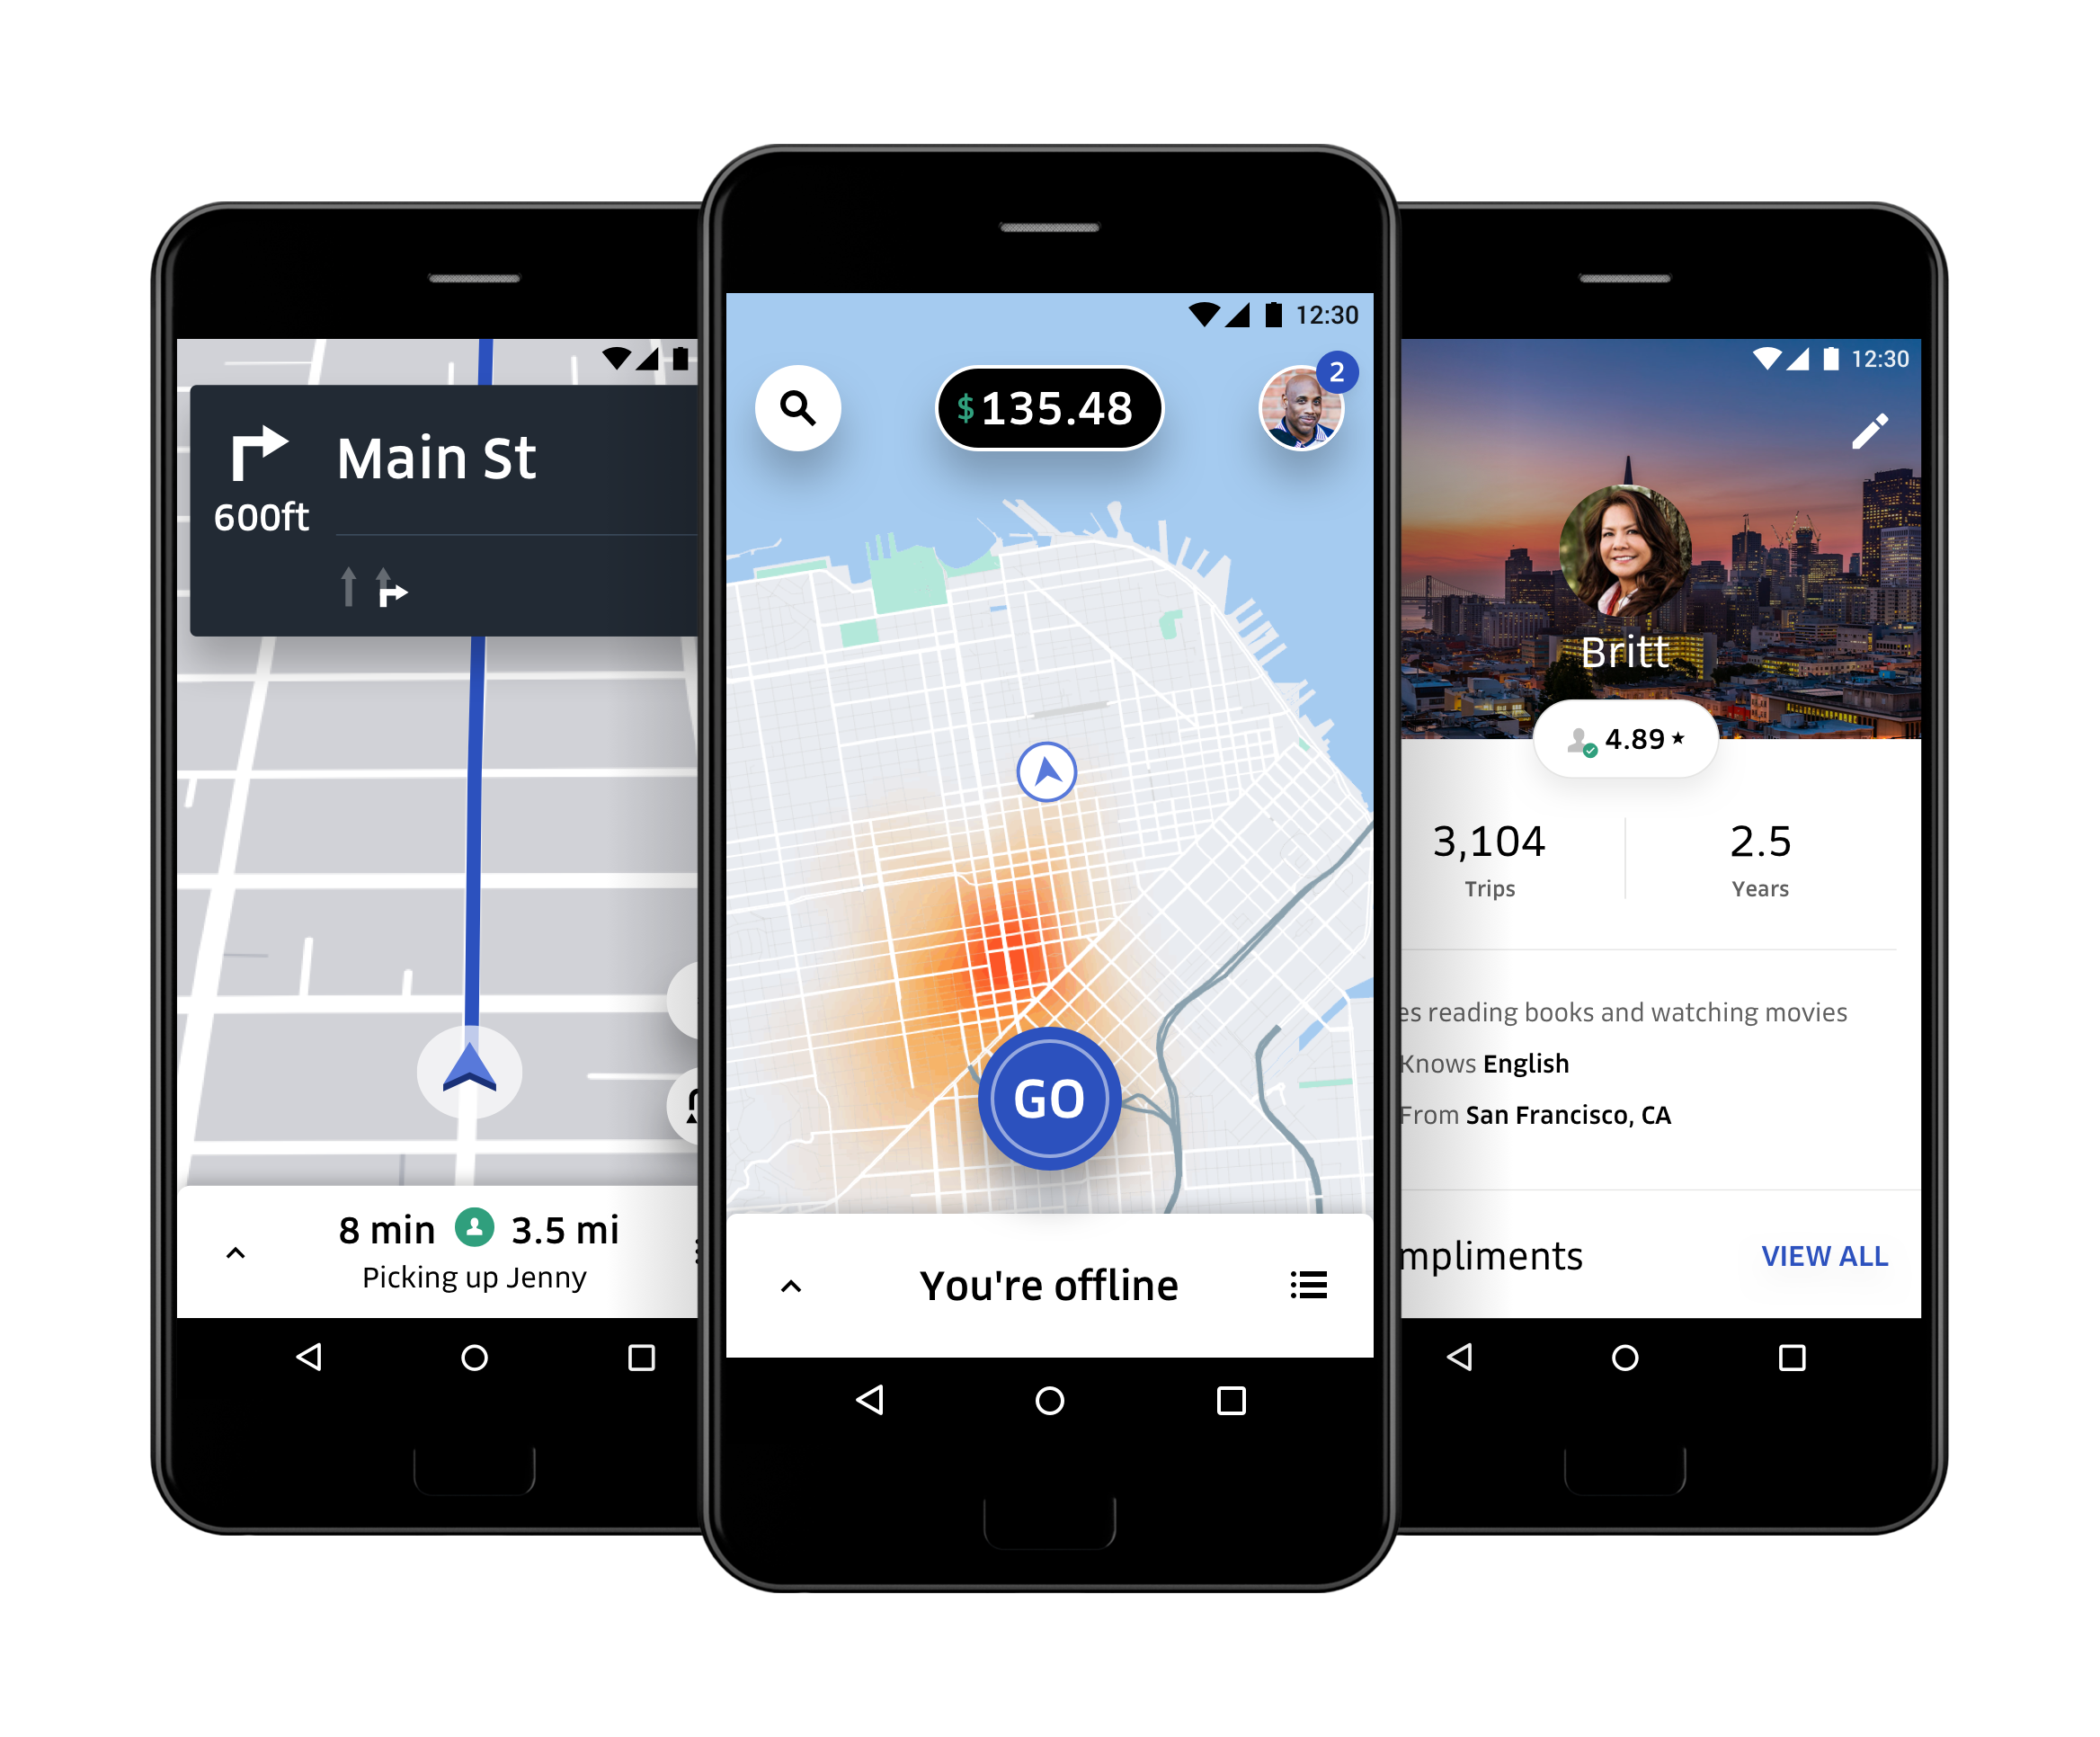 A New App, Built For and With Drivers.